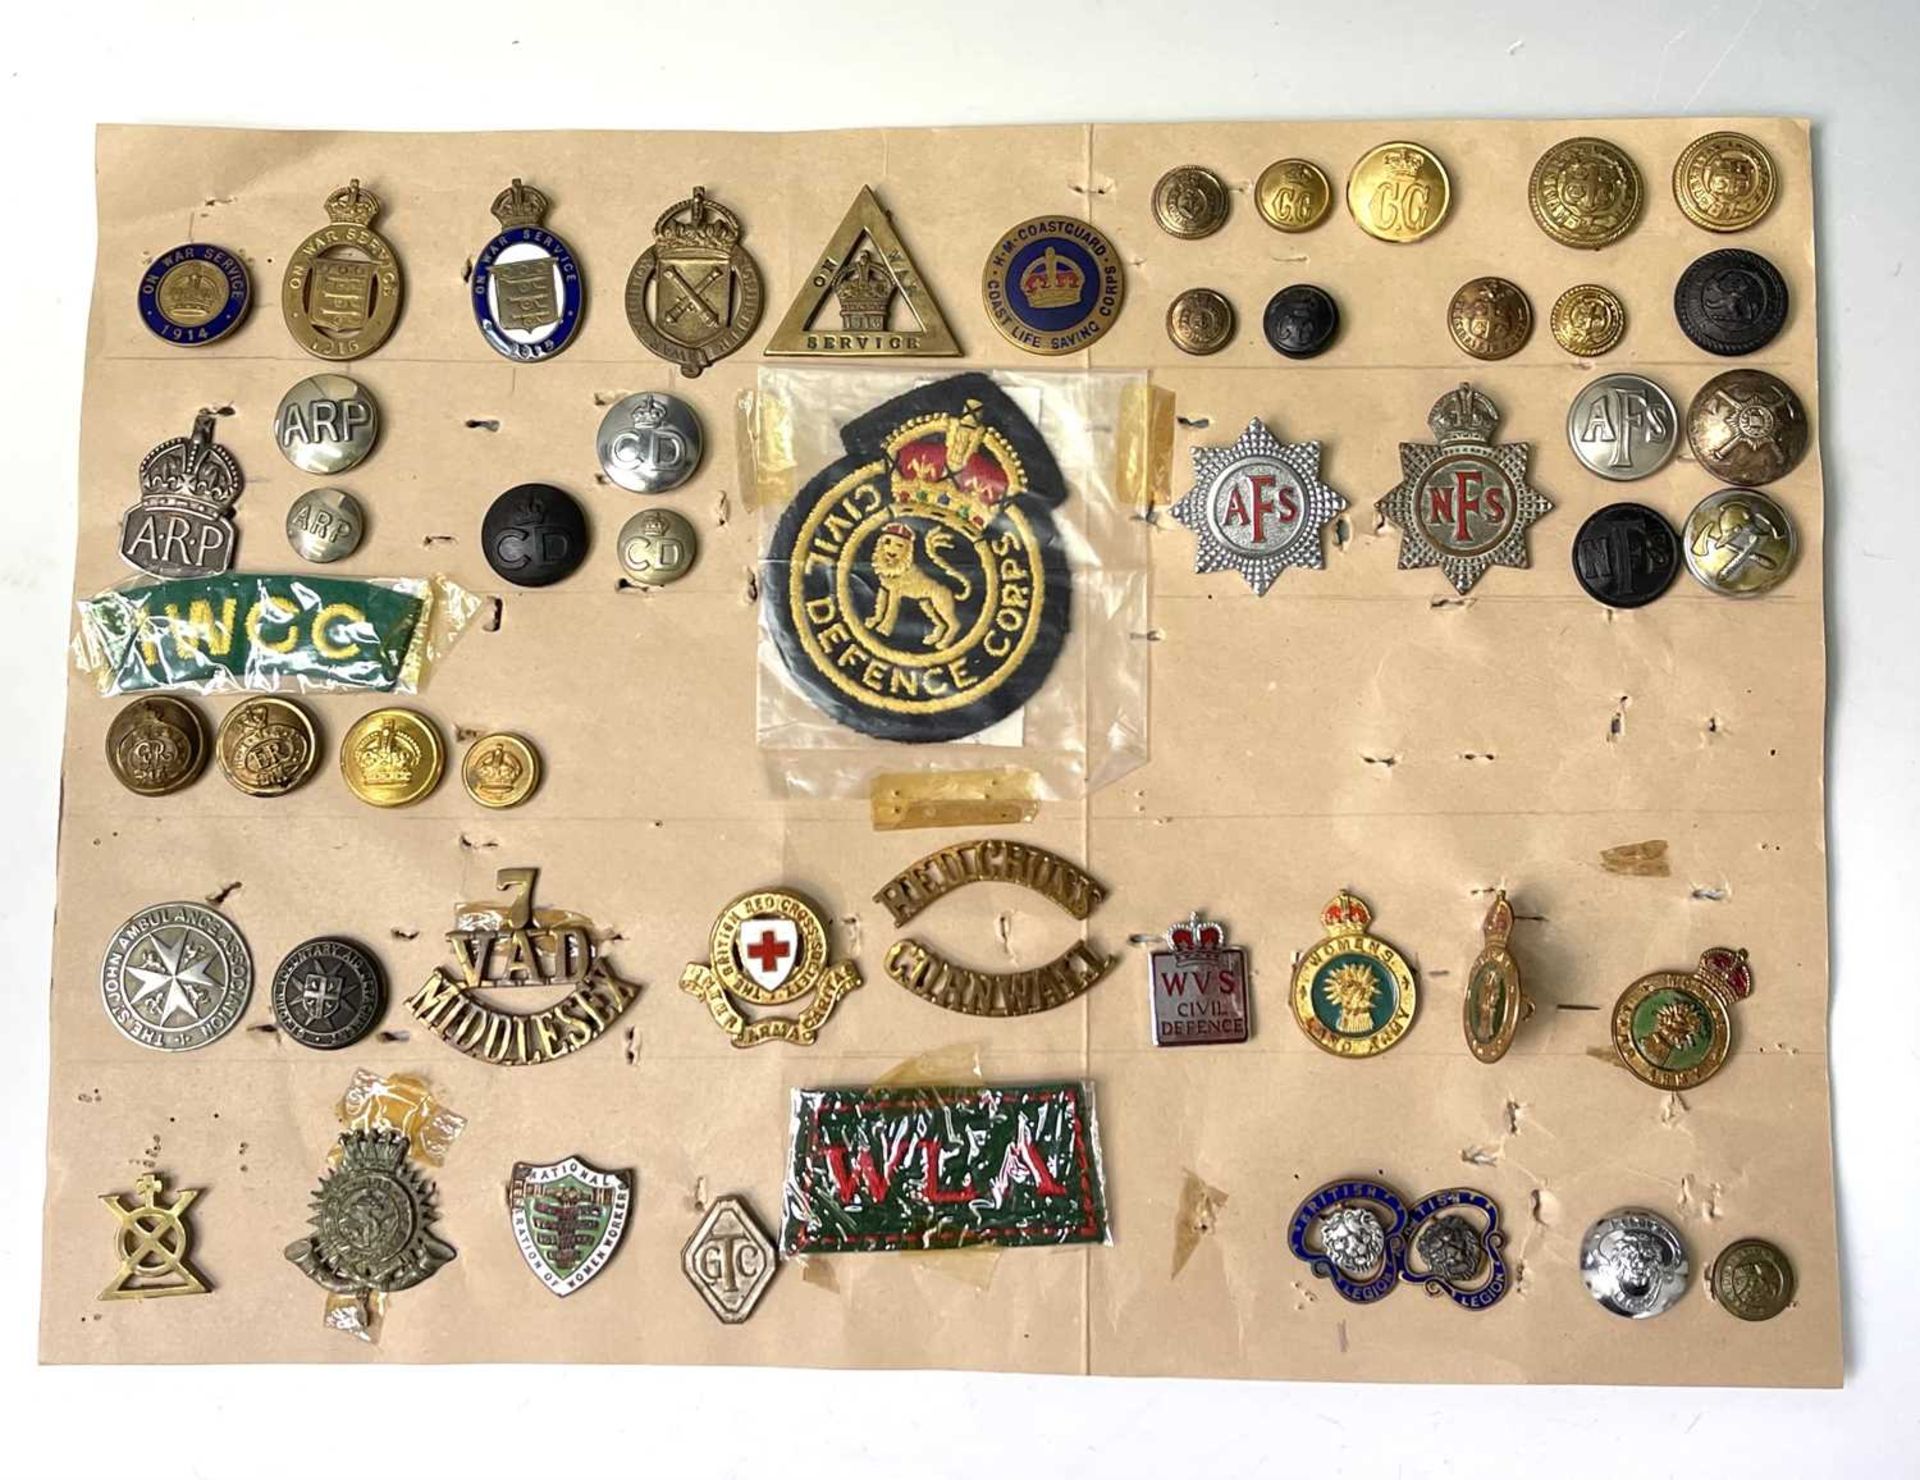 Military Auxiliary Services. A display card of badges, buttons, etc. Noted: On War Service, On War